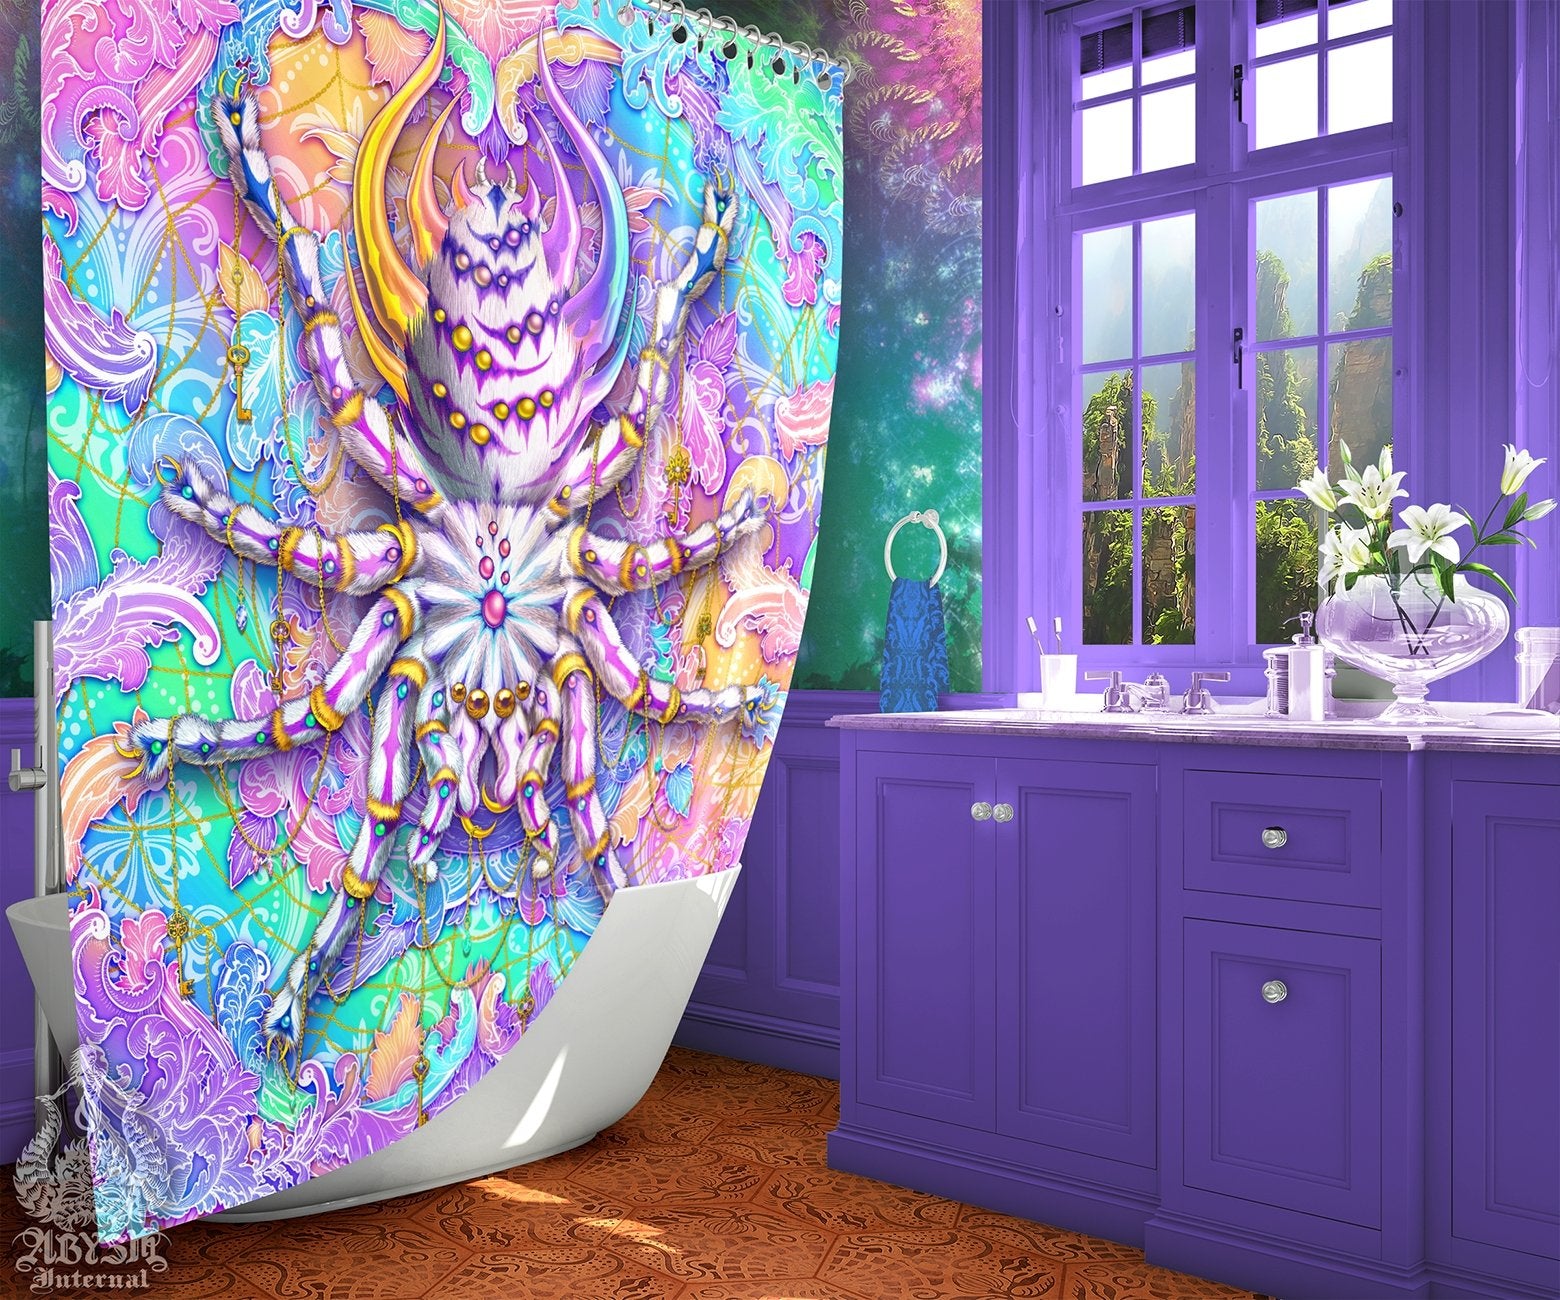 Aesthetic Shower Curtain, Psychedelic Bathroom Decor, Holographic Pastel Home -Spider, Tarantula Art - Abysm Internal